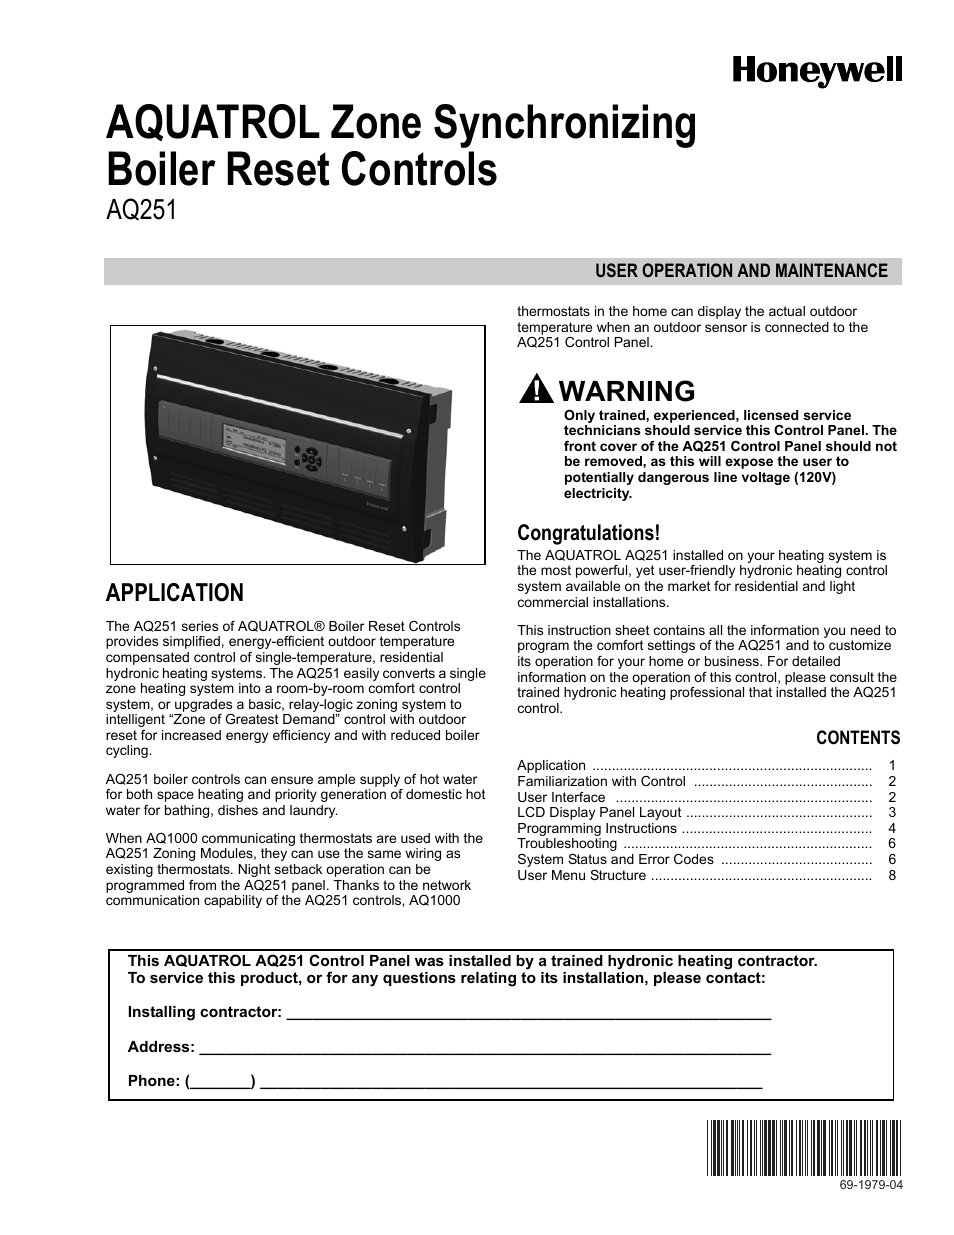 Honeywell RESET CONTROLS AQ251 User Manual | 8 pages